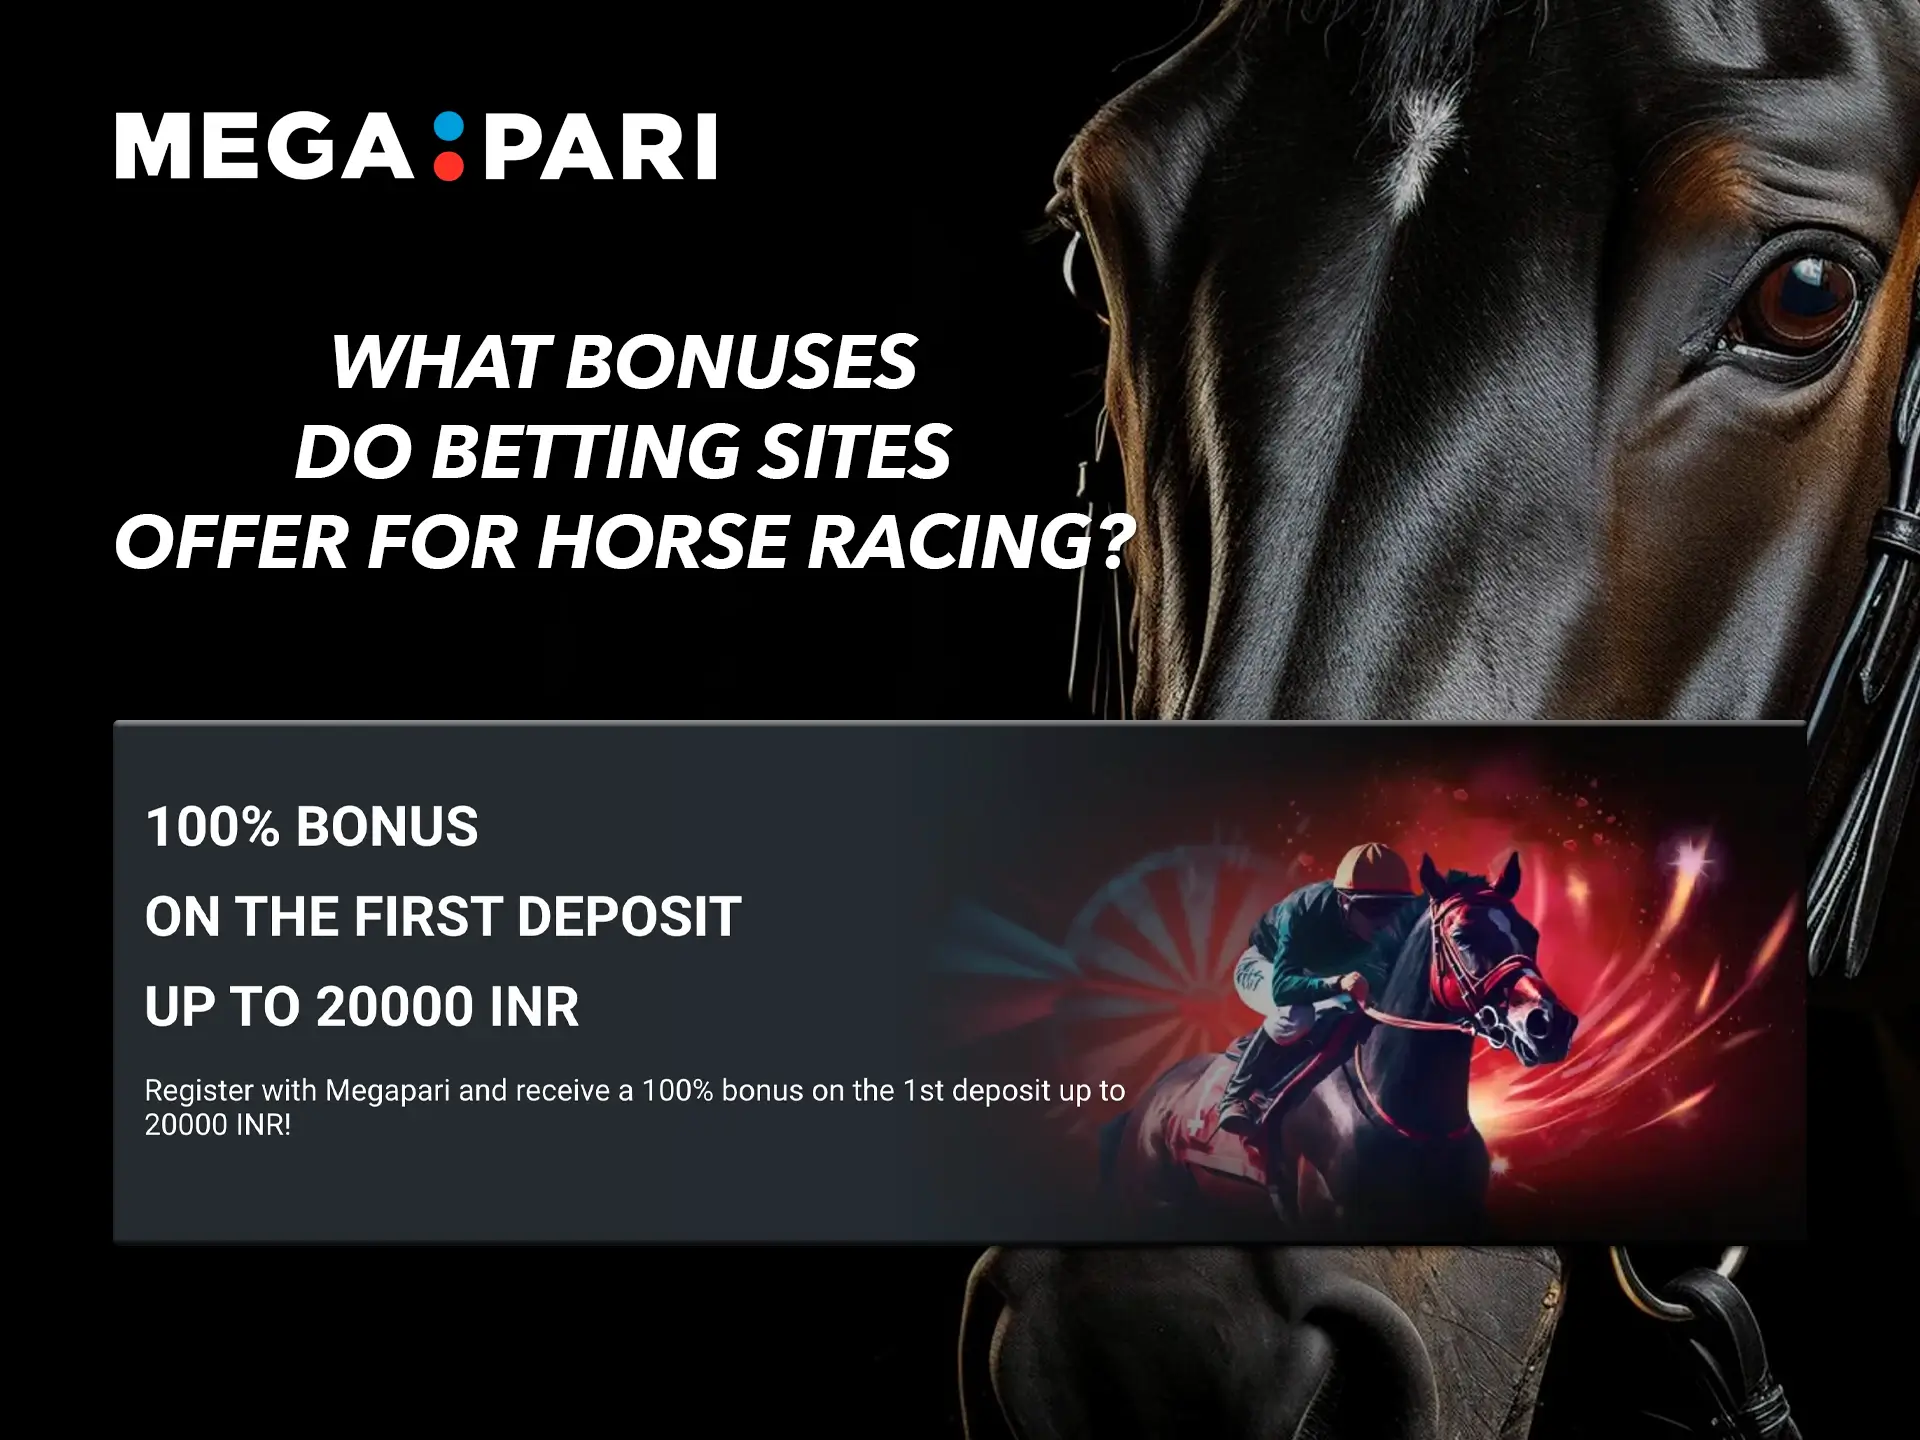 Megapari offers a great horse racing bonus that will significantly increase your balance and boost your winning opportunities.